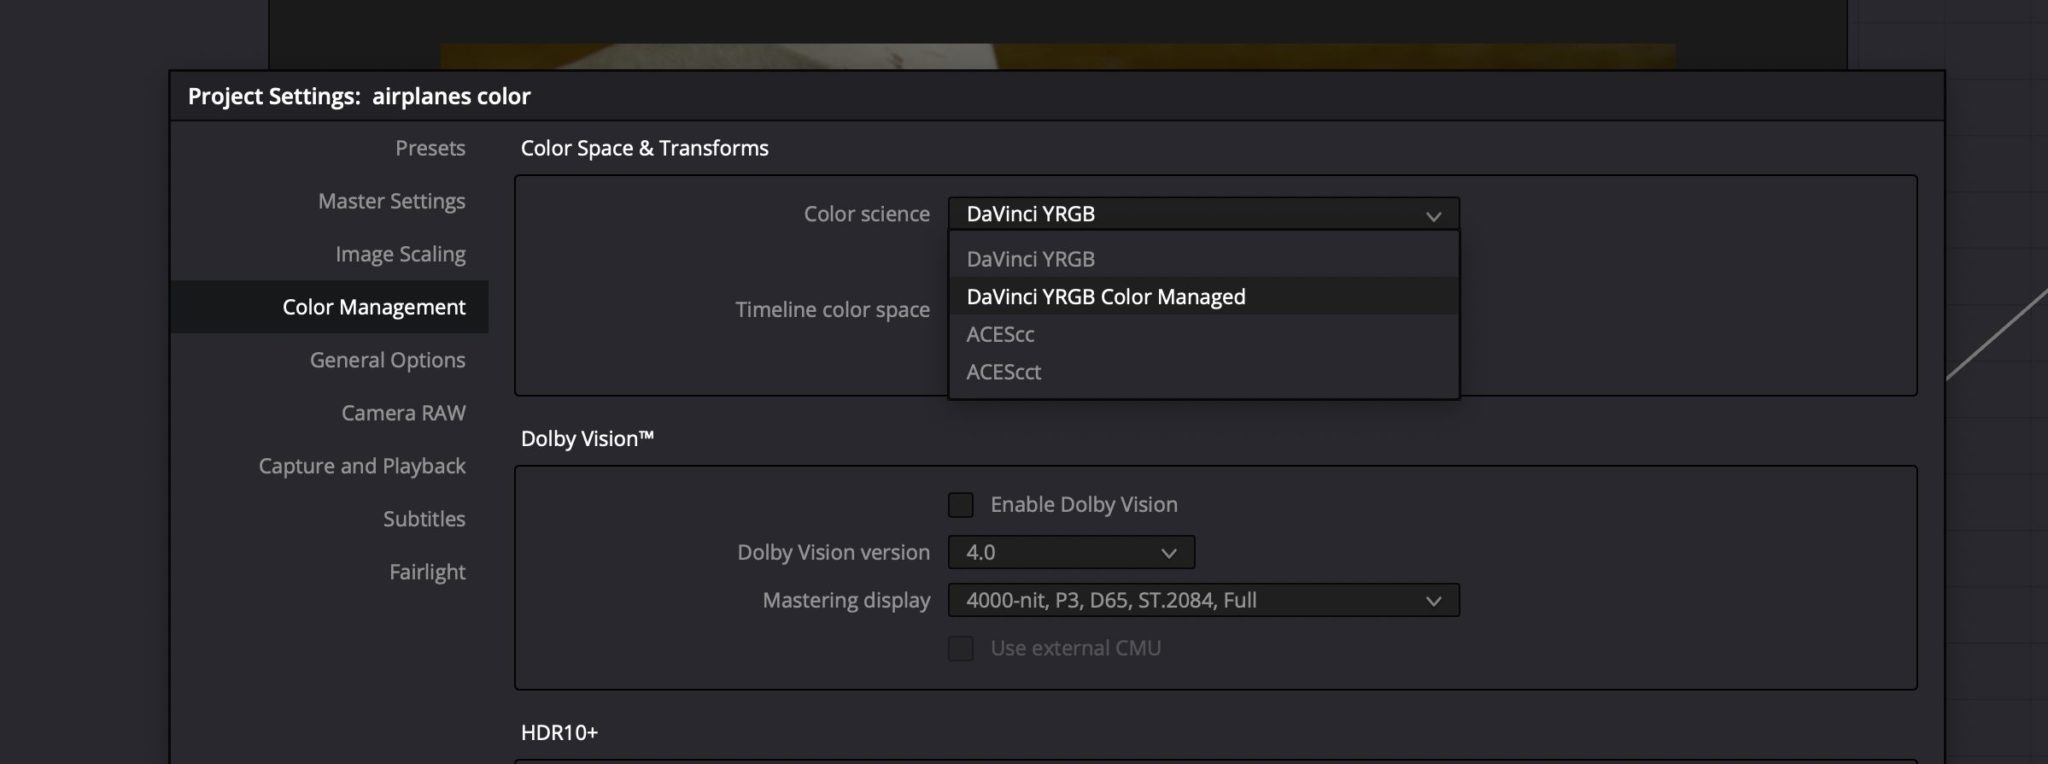 Exploring What is New in Resolve 17 Beta